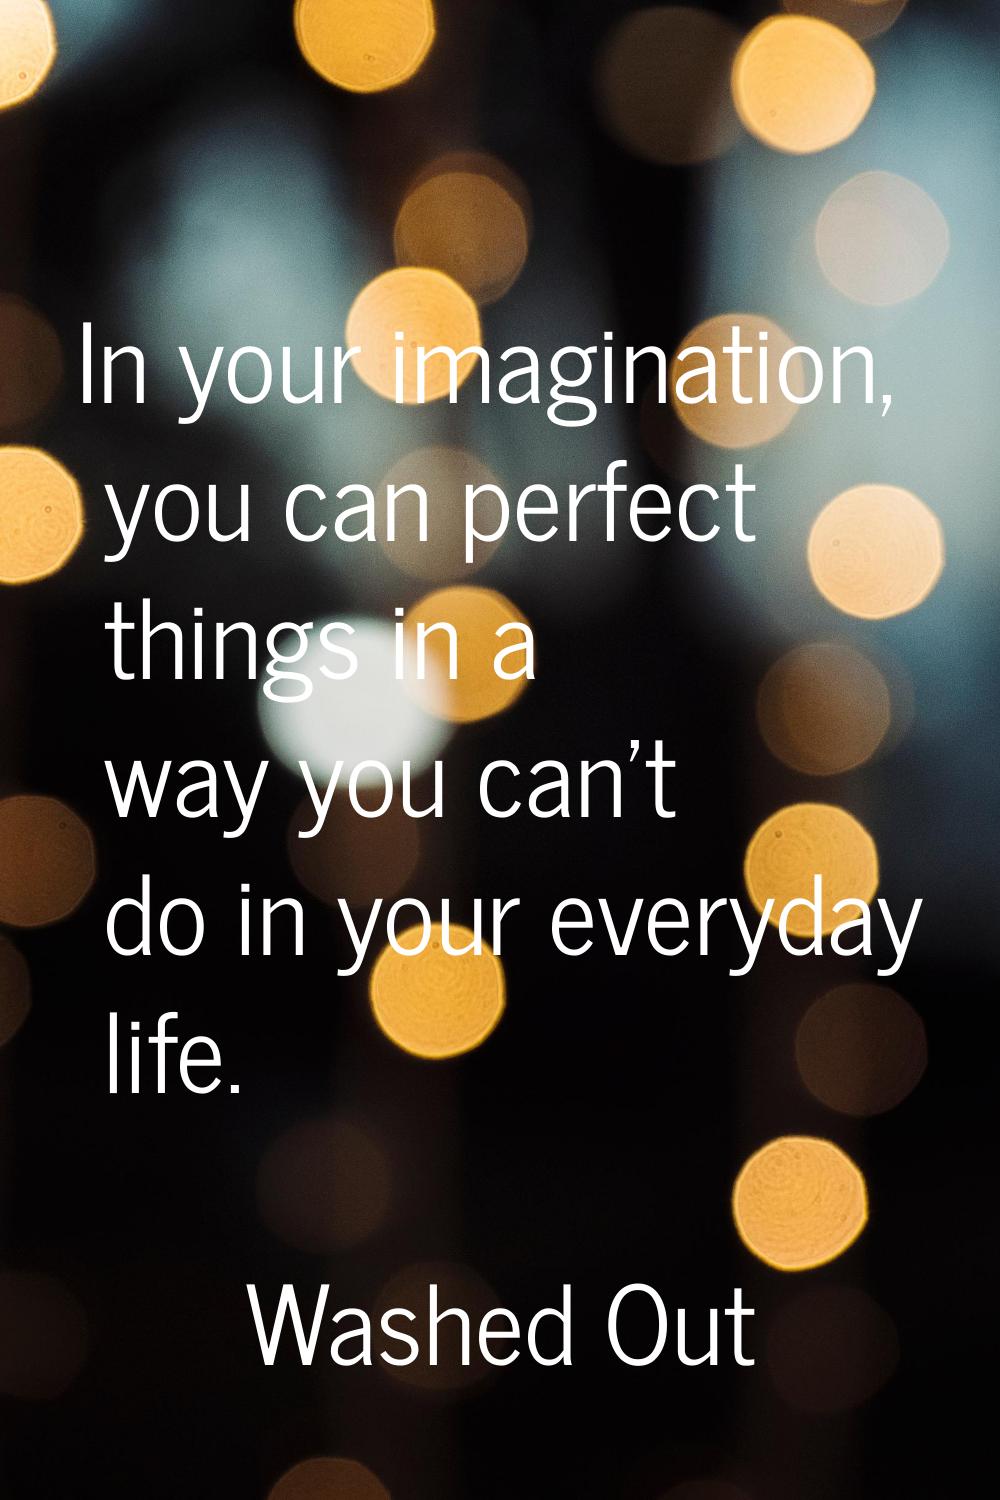 In your imagination, you can perfect things in a way you can't do in your everyday life.